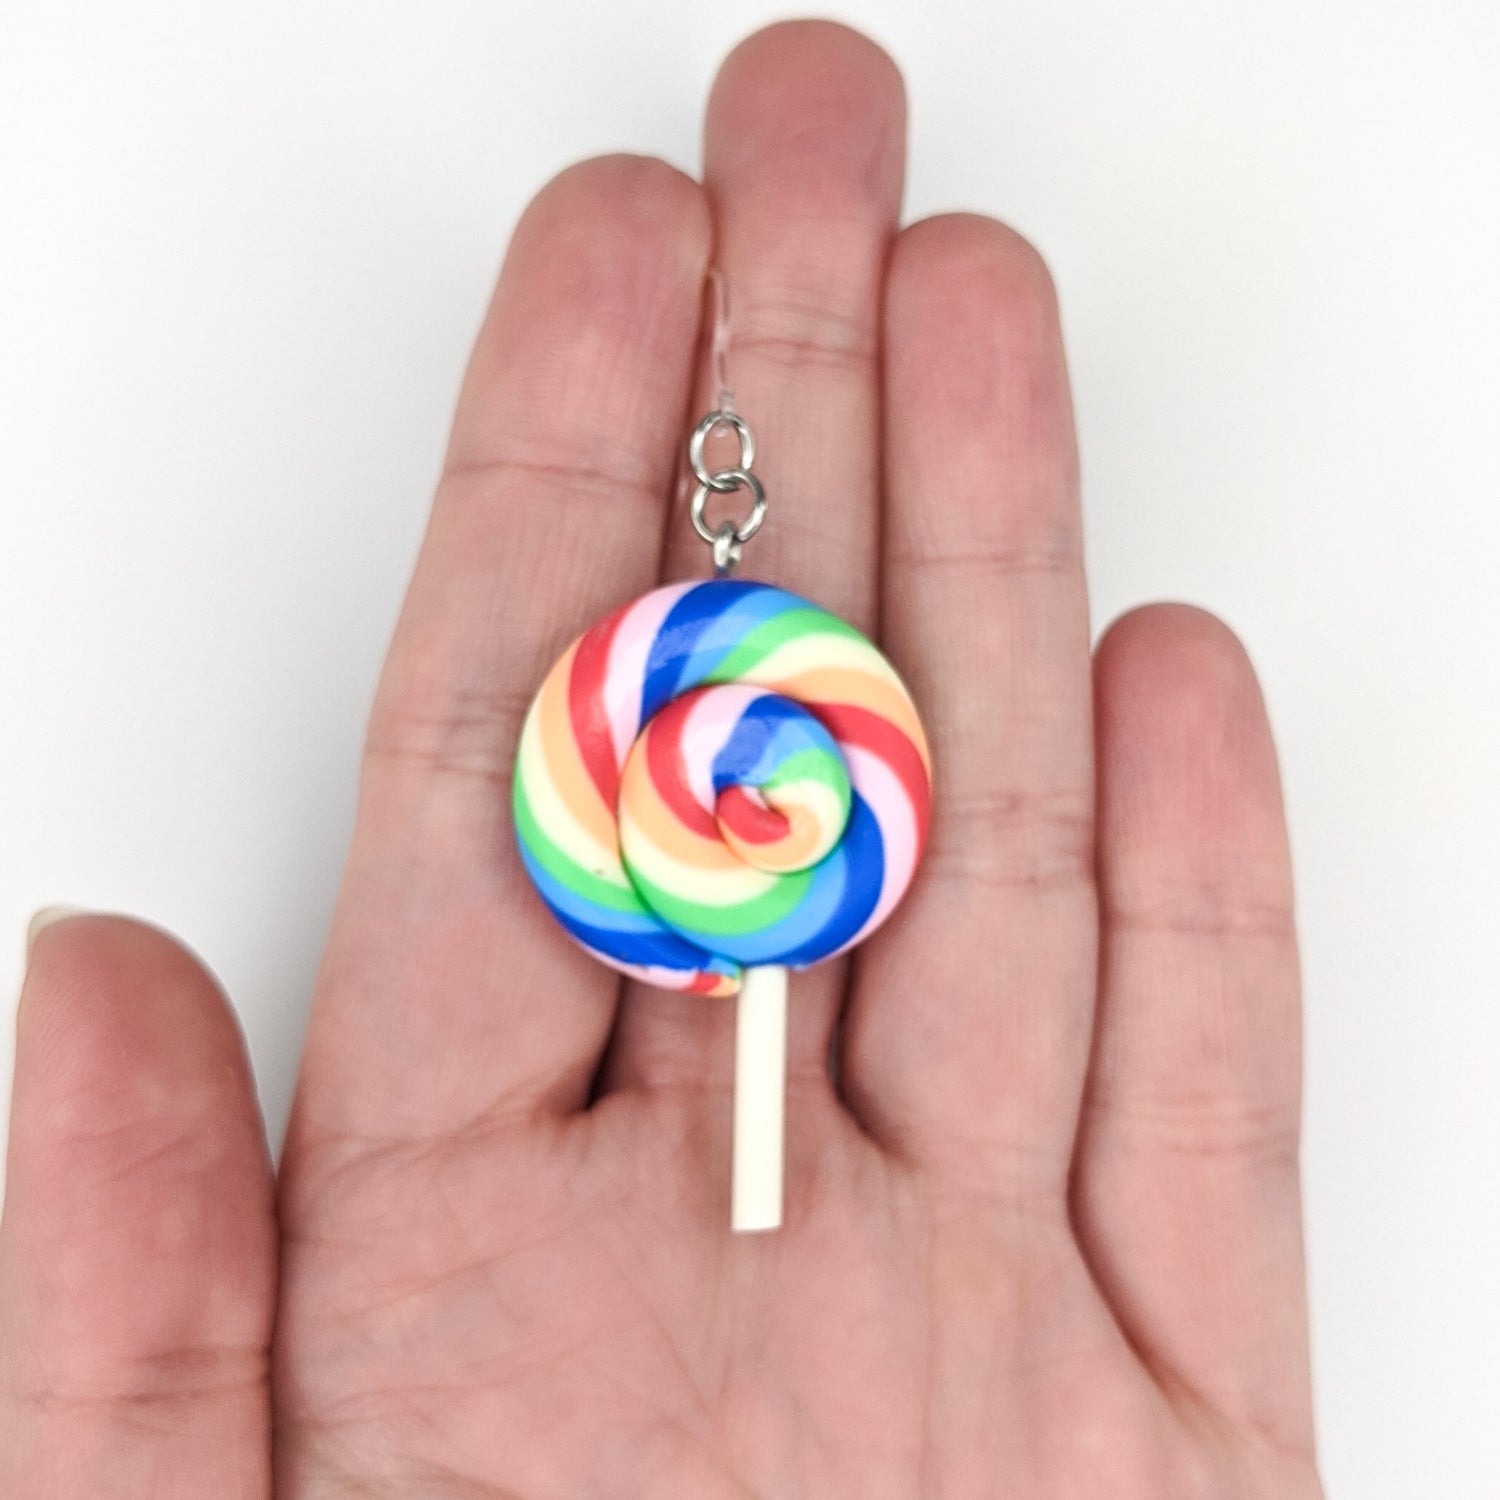 Exaggerated Lollipop Earrings (Dangles) - size comparison hand